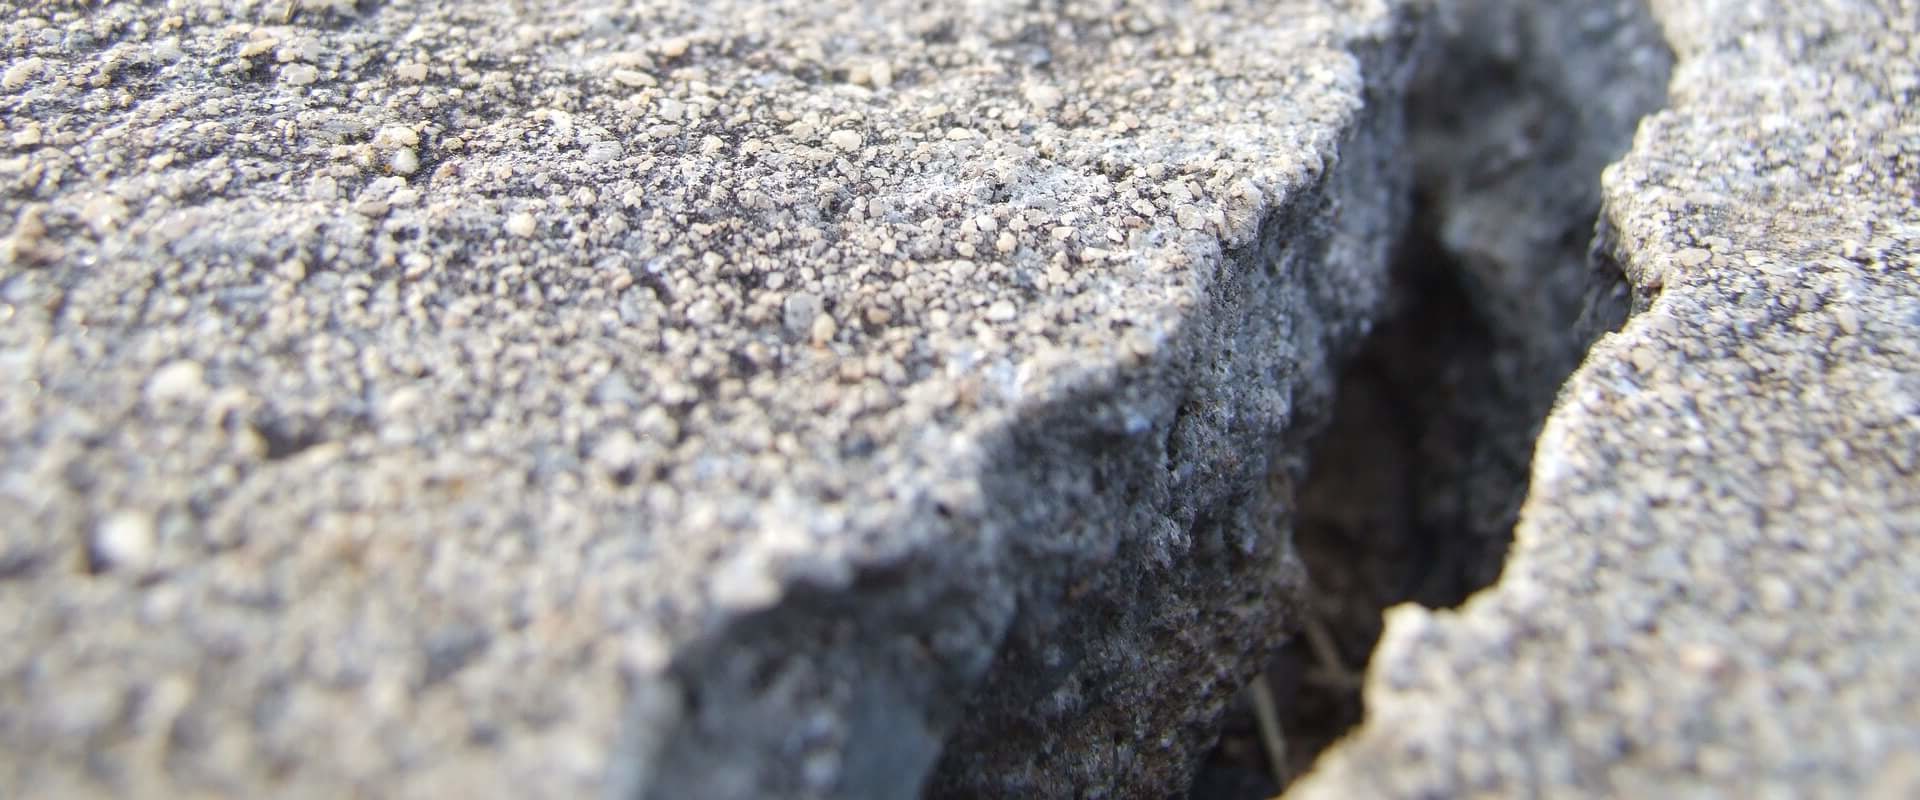 How thick should concrete be to prevent it from cracking?